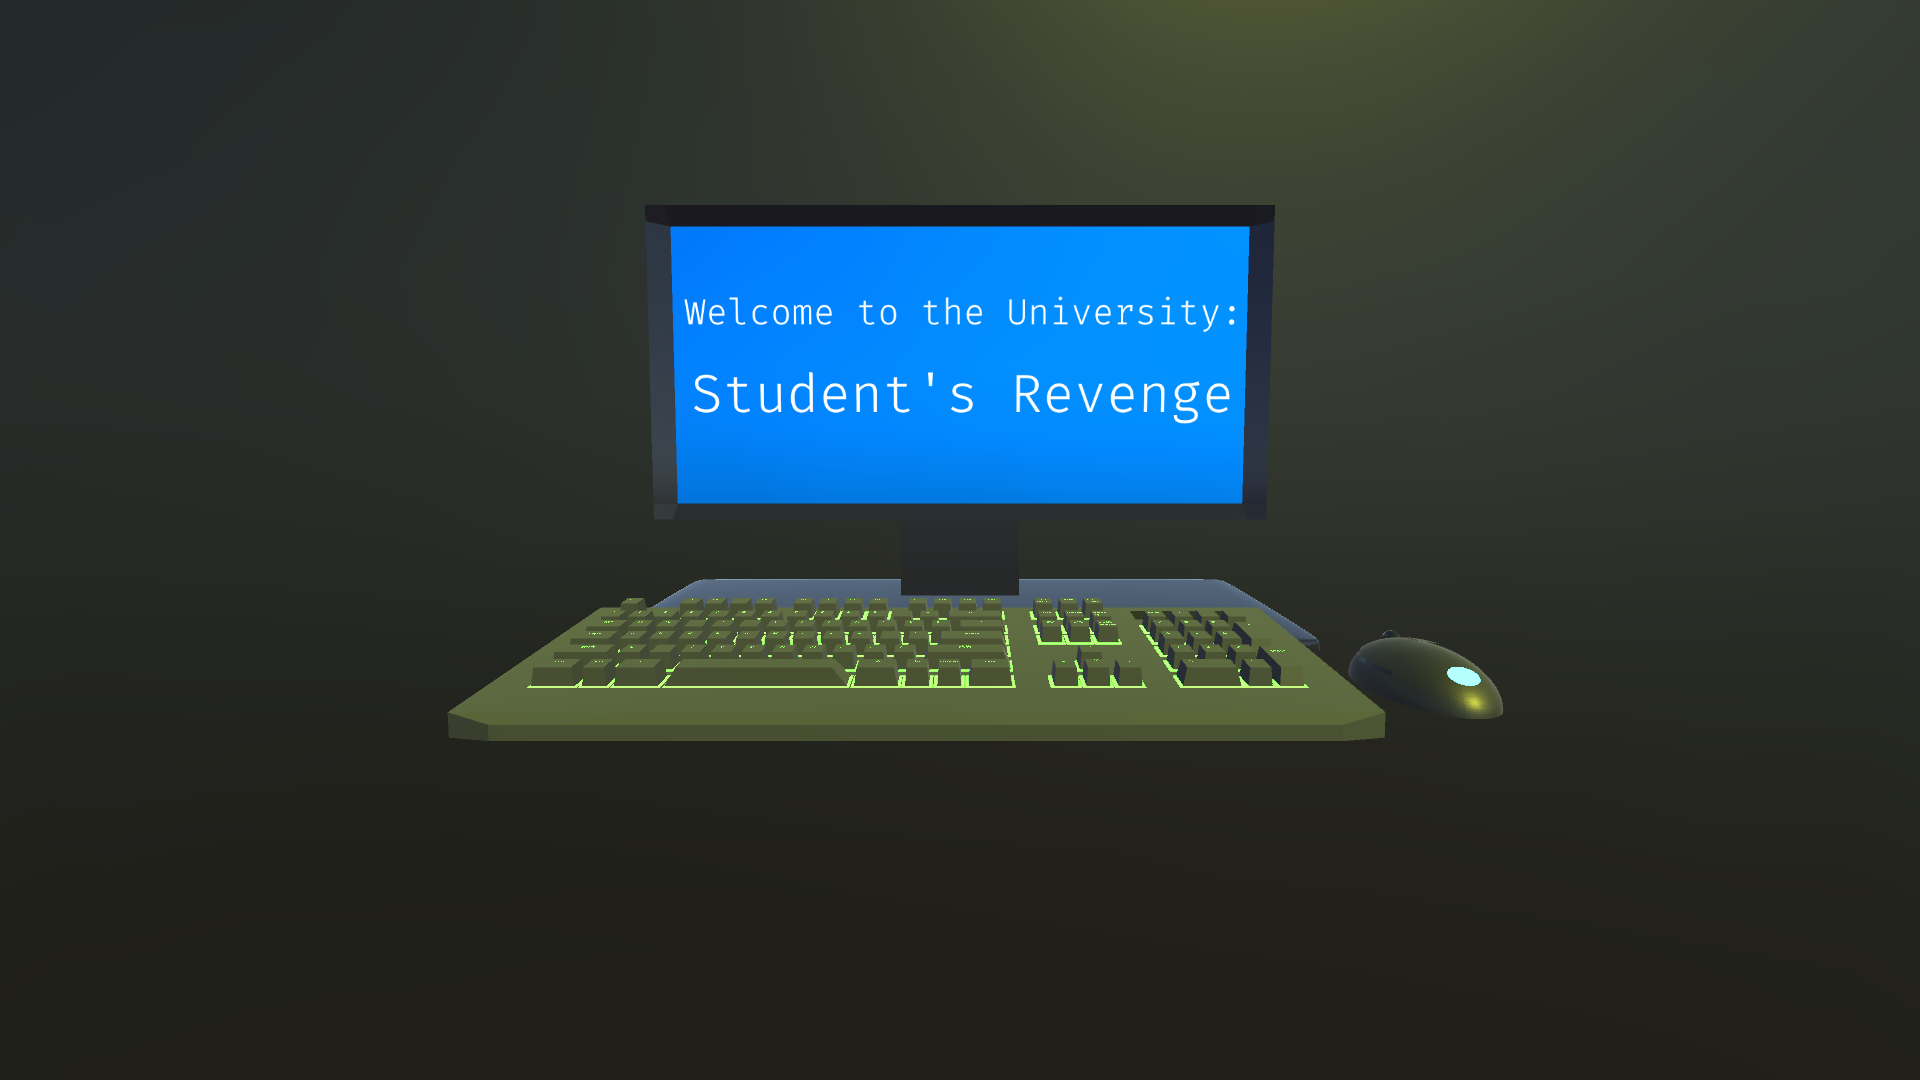 Welcome to the University: Student's Revenge